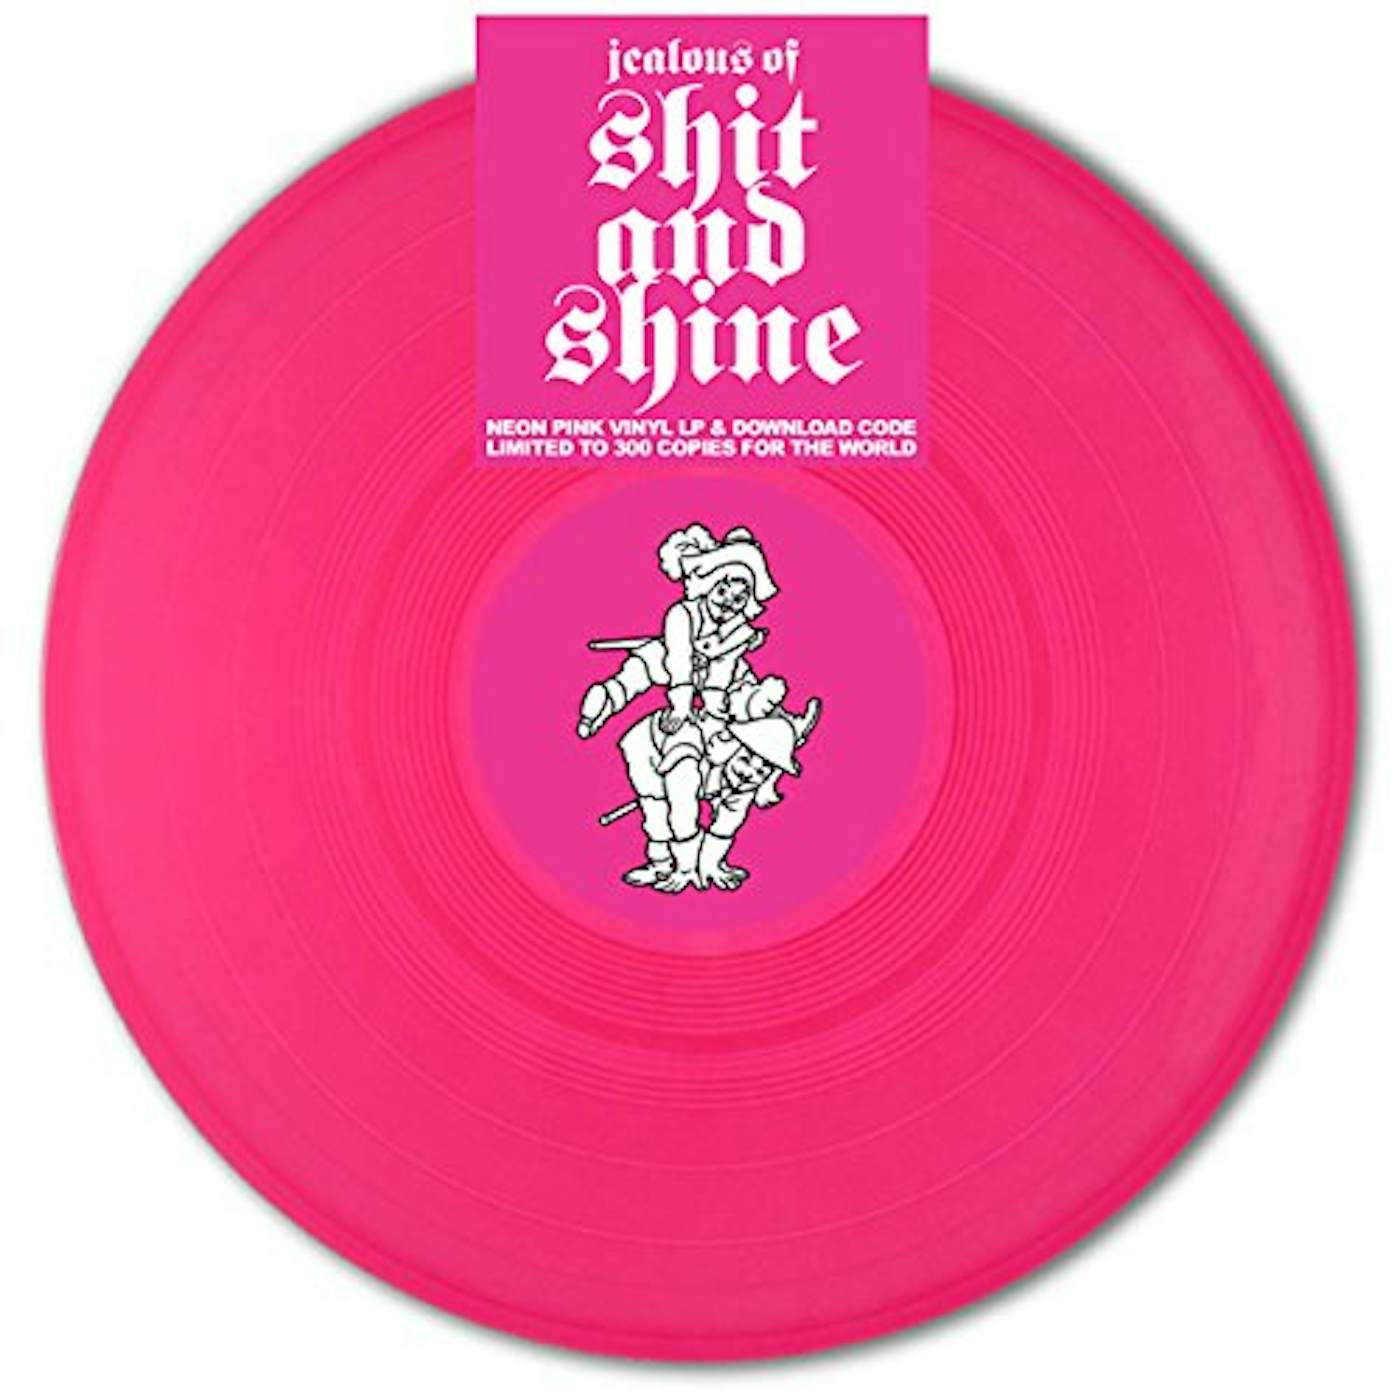 Jealous of Shit and Shine Vinyl Record